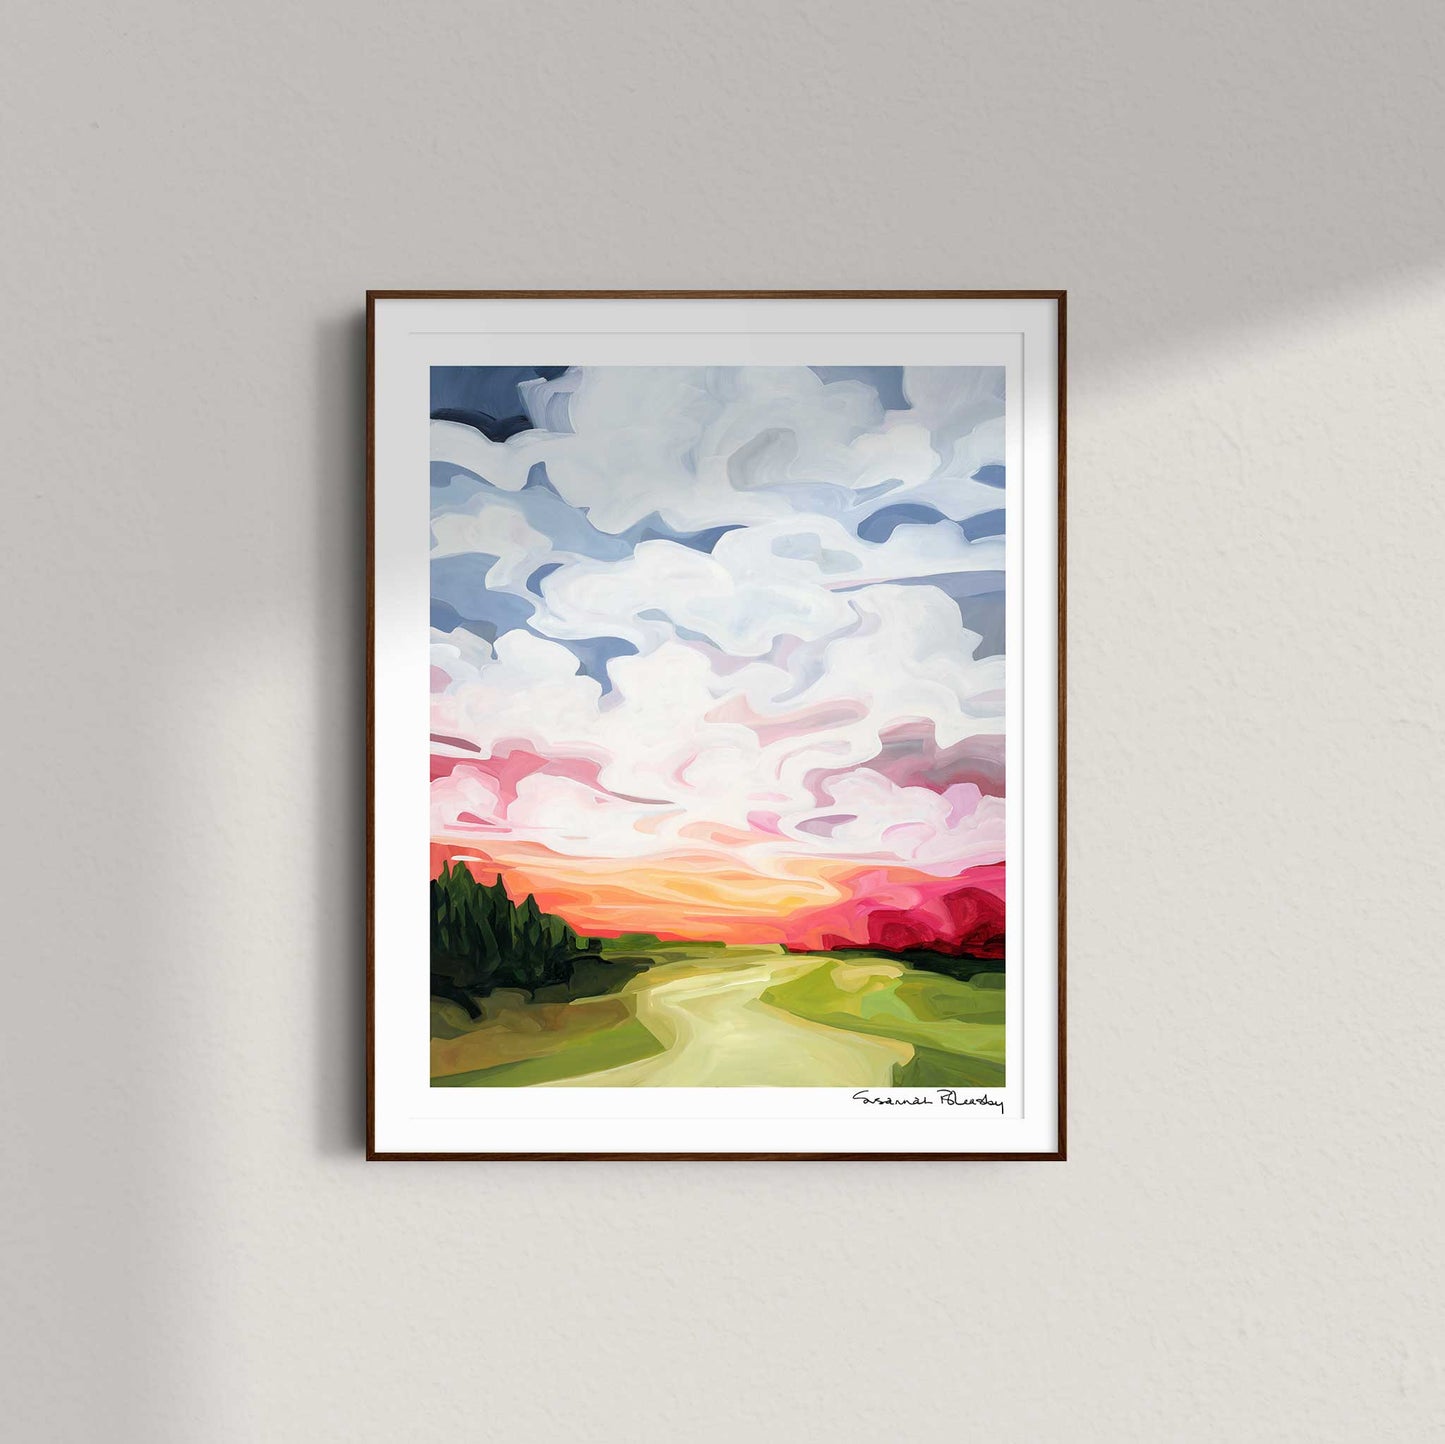 Framed 16x20 vertical art print of a vibrant sunrise painting by Canadian artist Susannah Bleasby